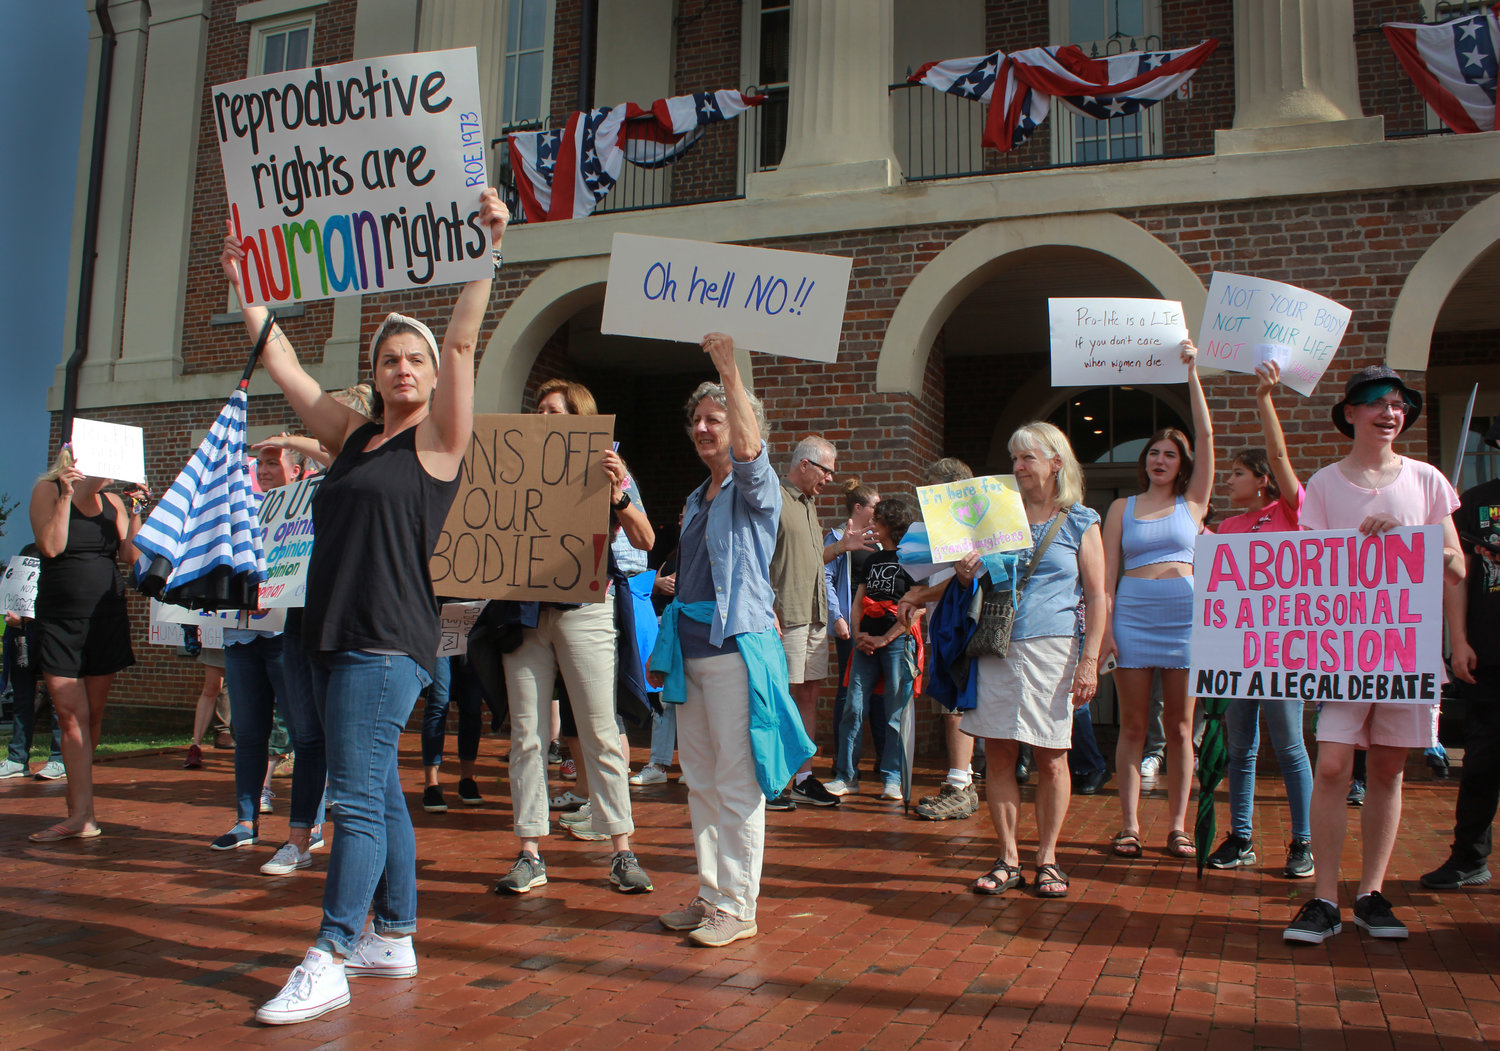 Protesters hold signs and chant outside of the Pittsboro Historic Courthouse  during the abortion and women’s rights protest on Monday in Pittsboro. Pittsboro Mayor Cindy Perry and Chatham County Commisioner Karen Howard were some of the more notable participants at the rally.